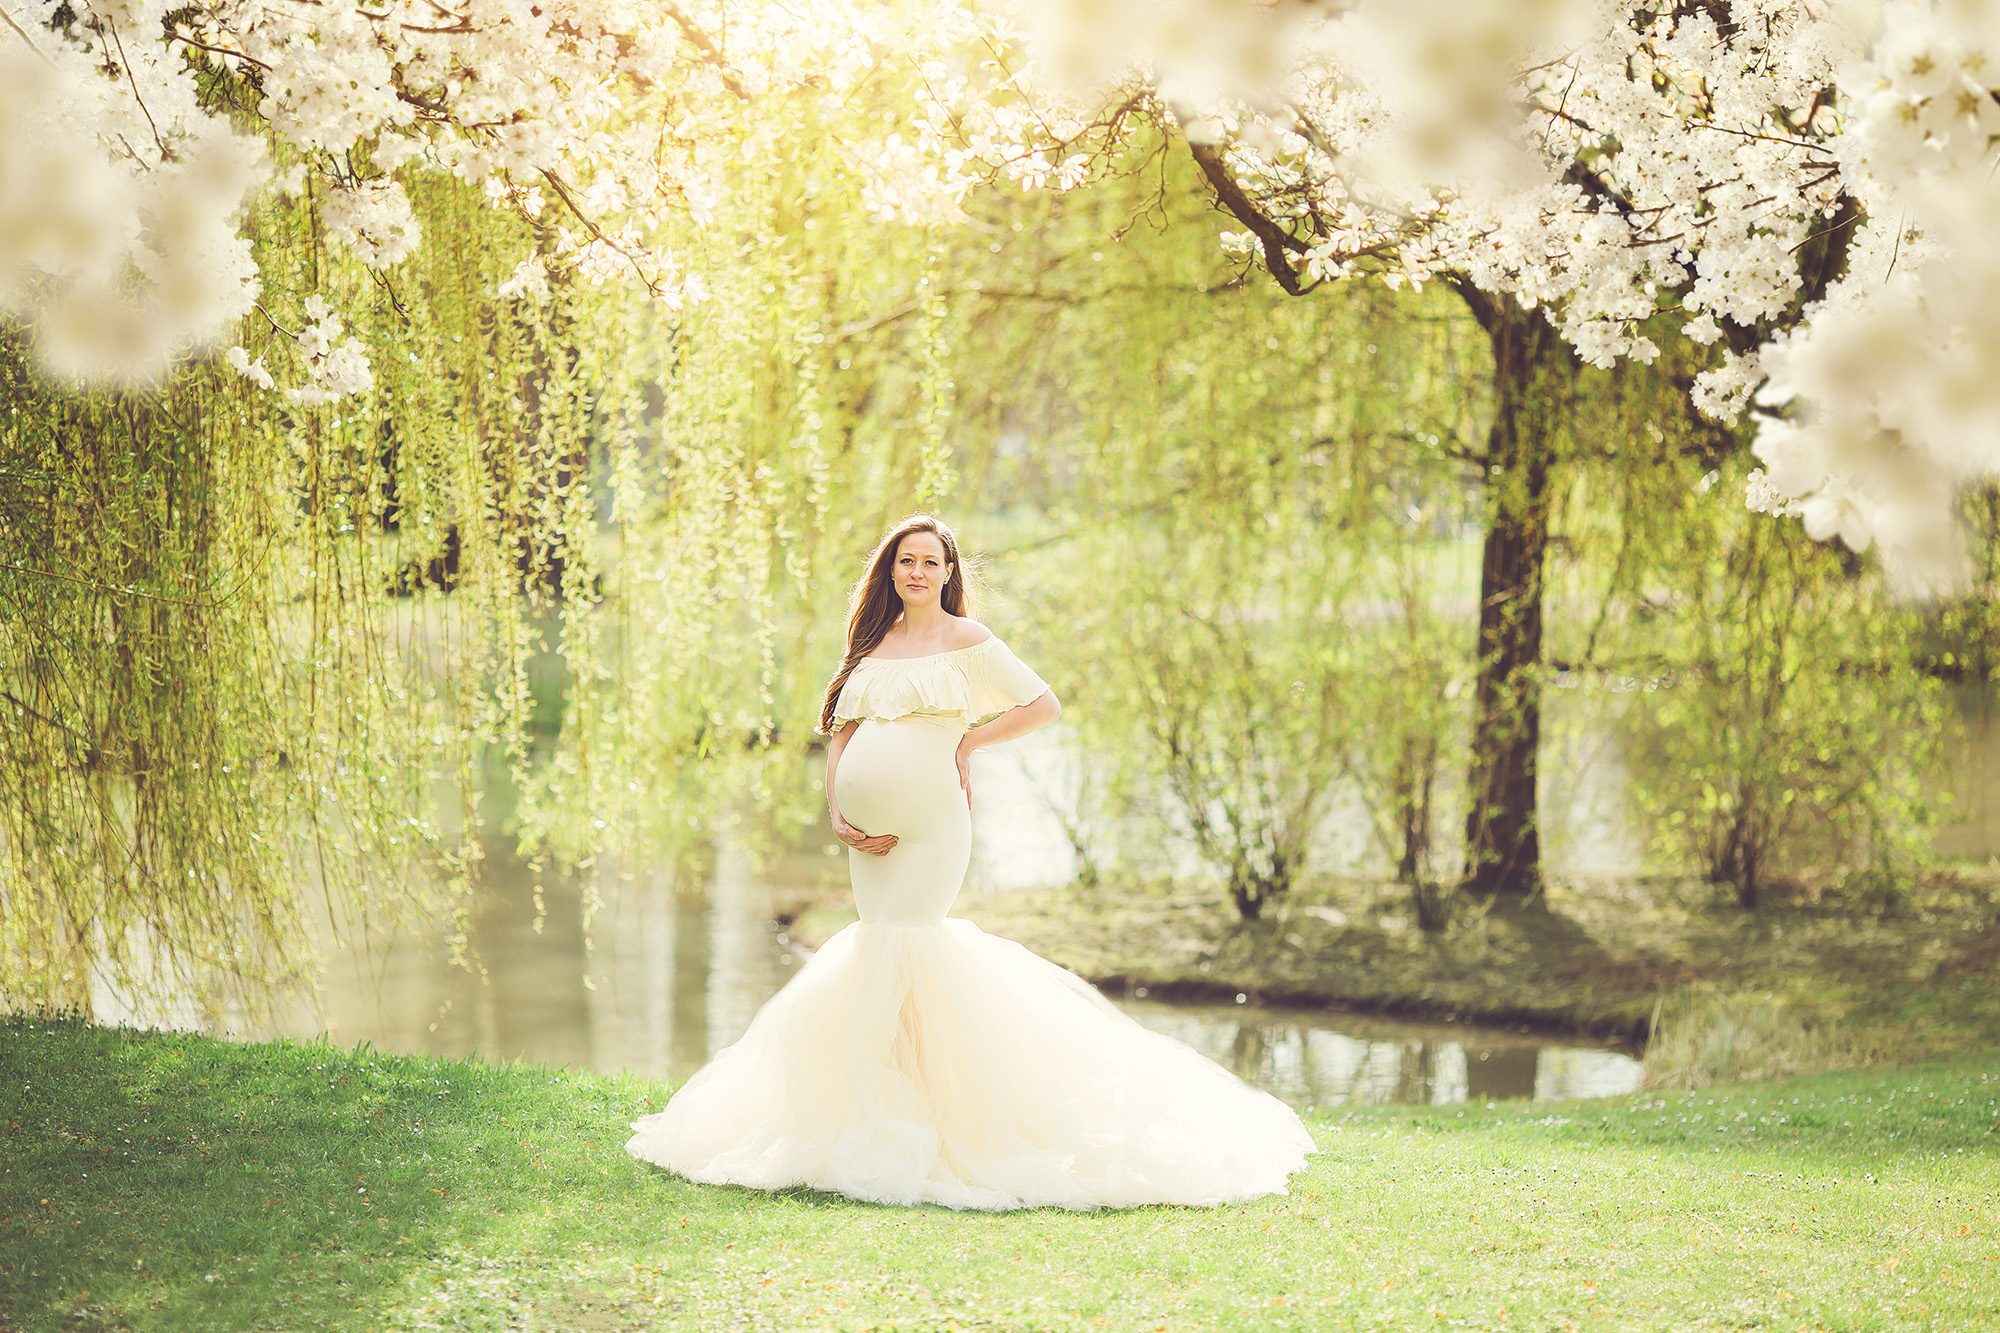 Spring blooms and a weeping willow creates a magical ambience for Tabitha's spring maternity session.